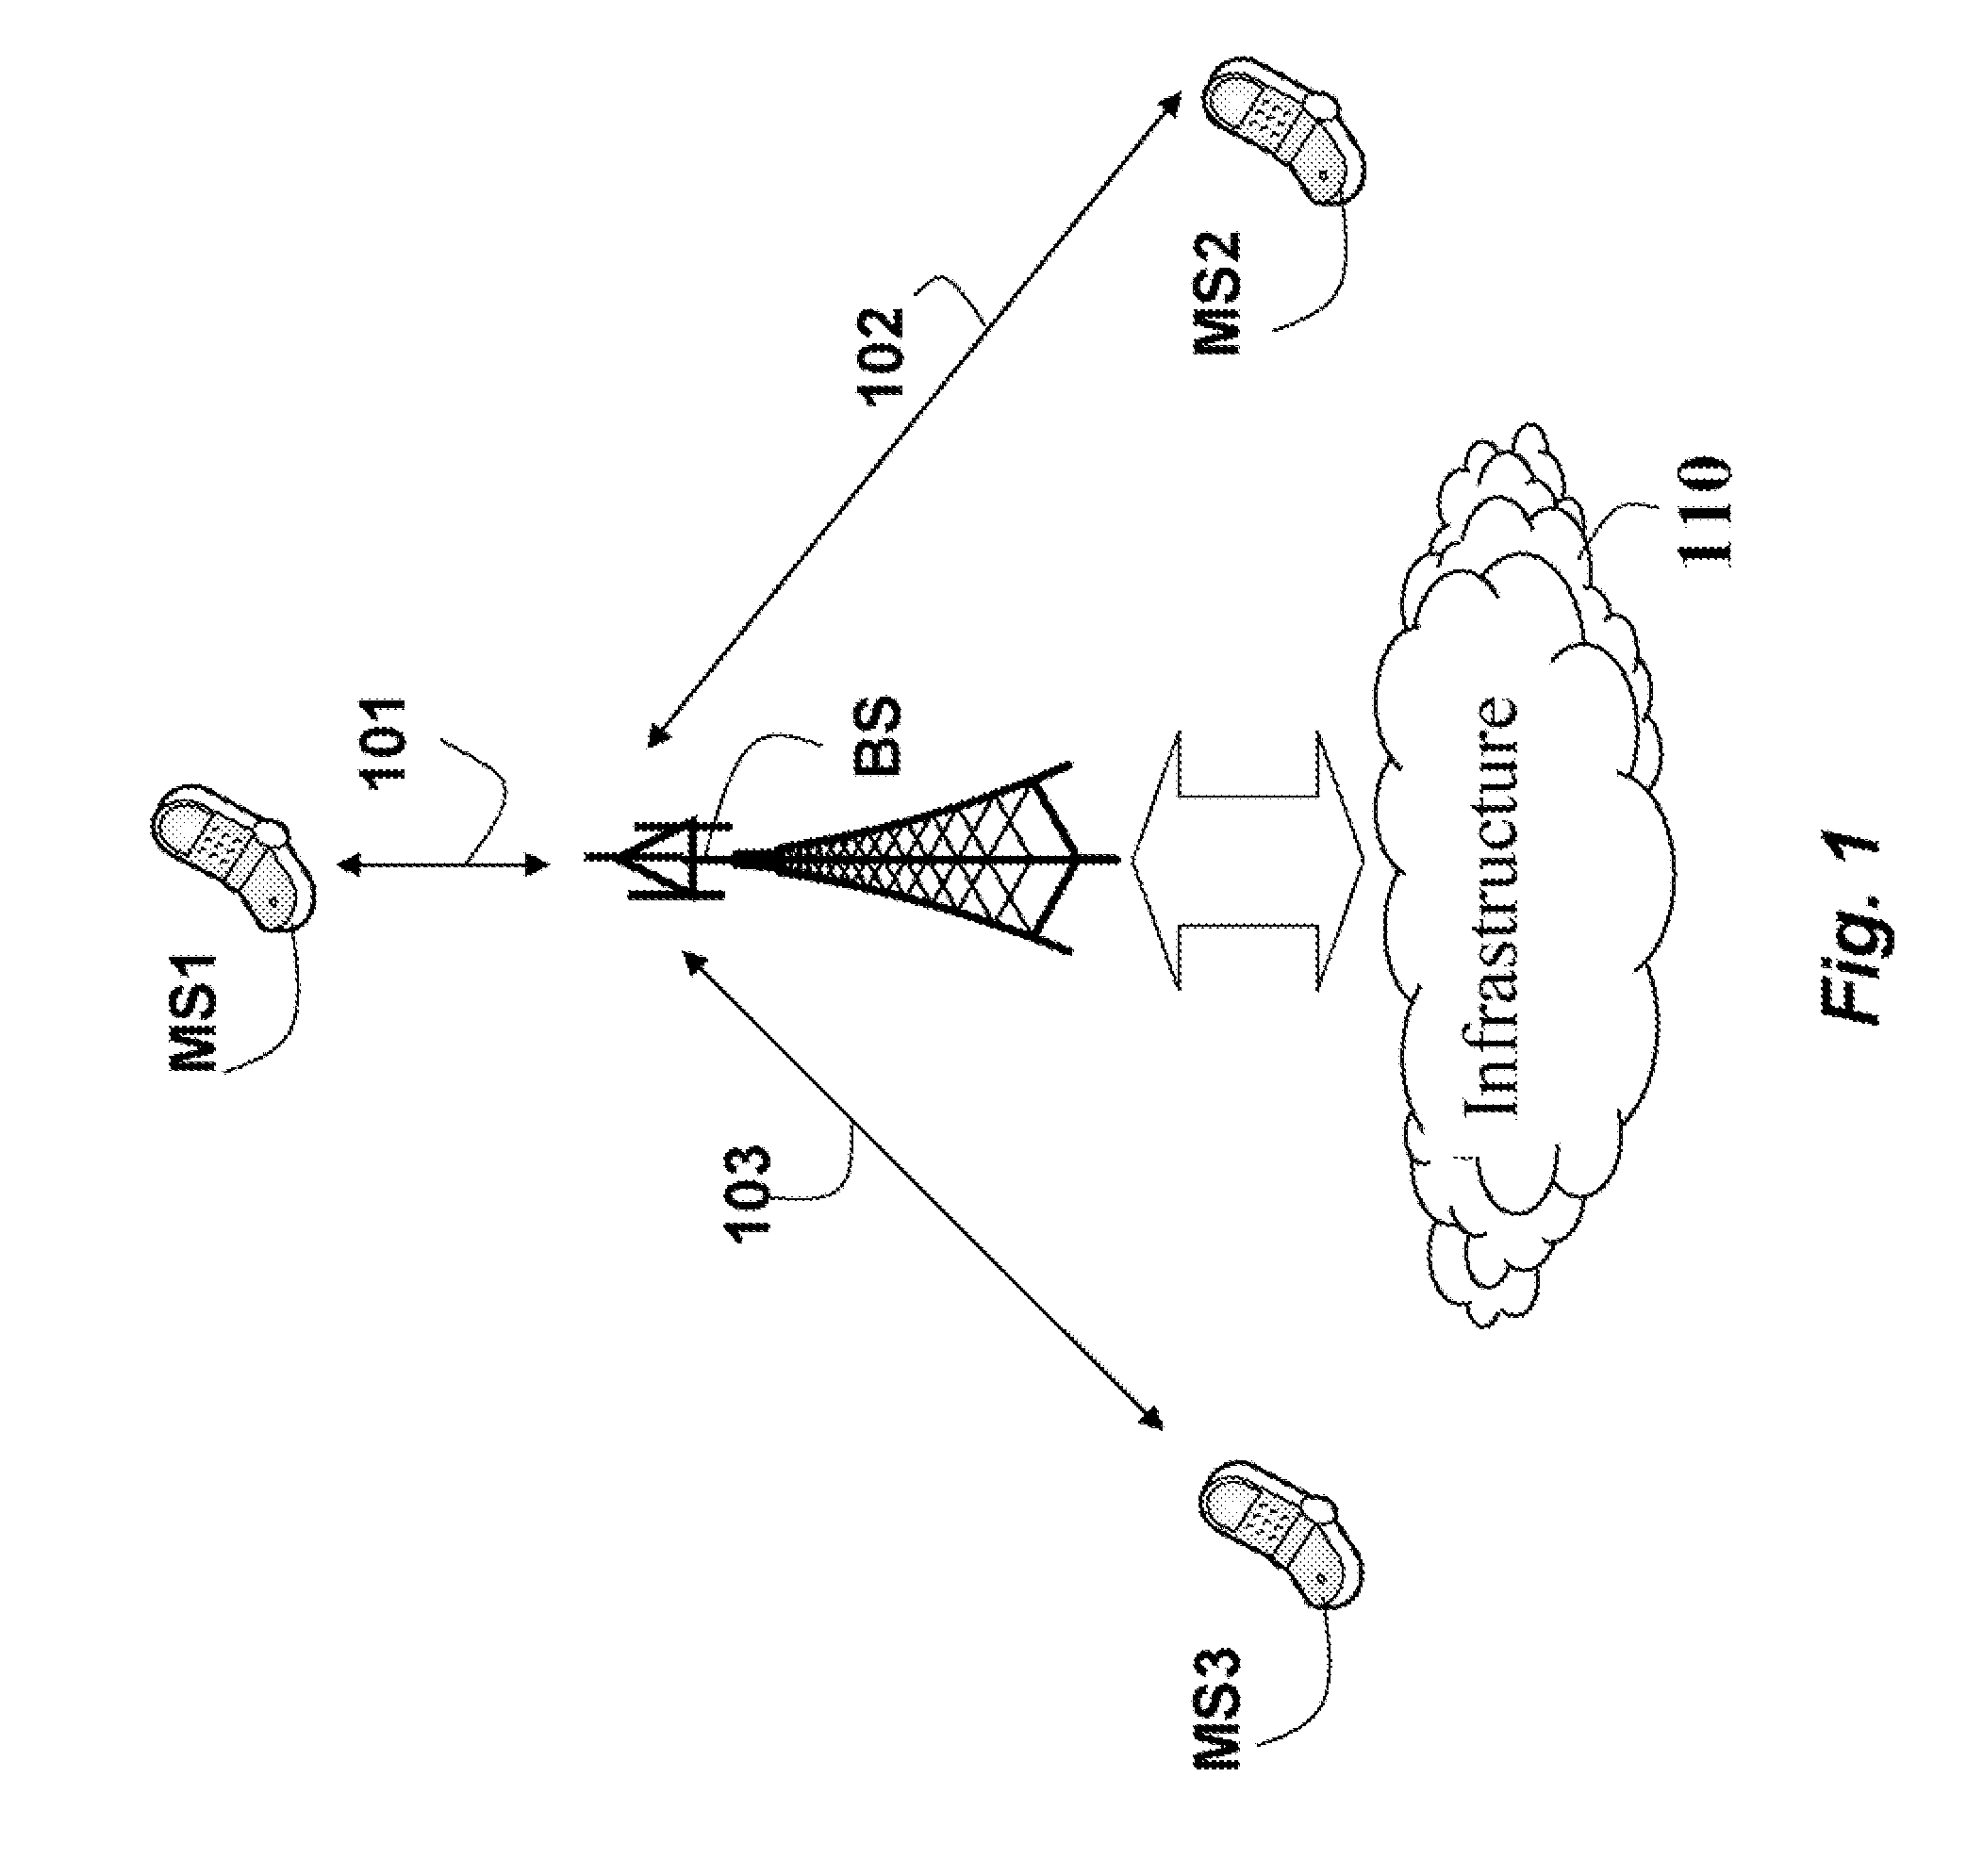 Method and System for Selecting Antennas Adaptively in OFDMA Networks